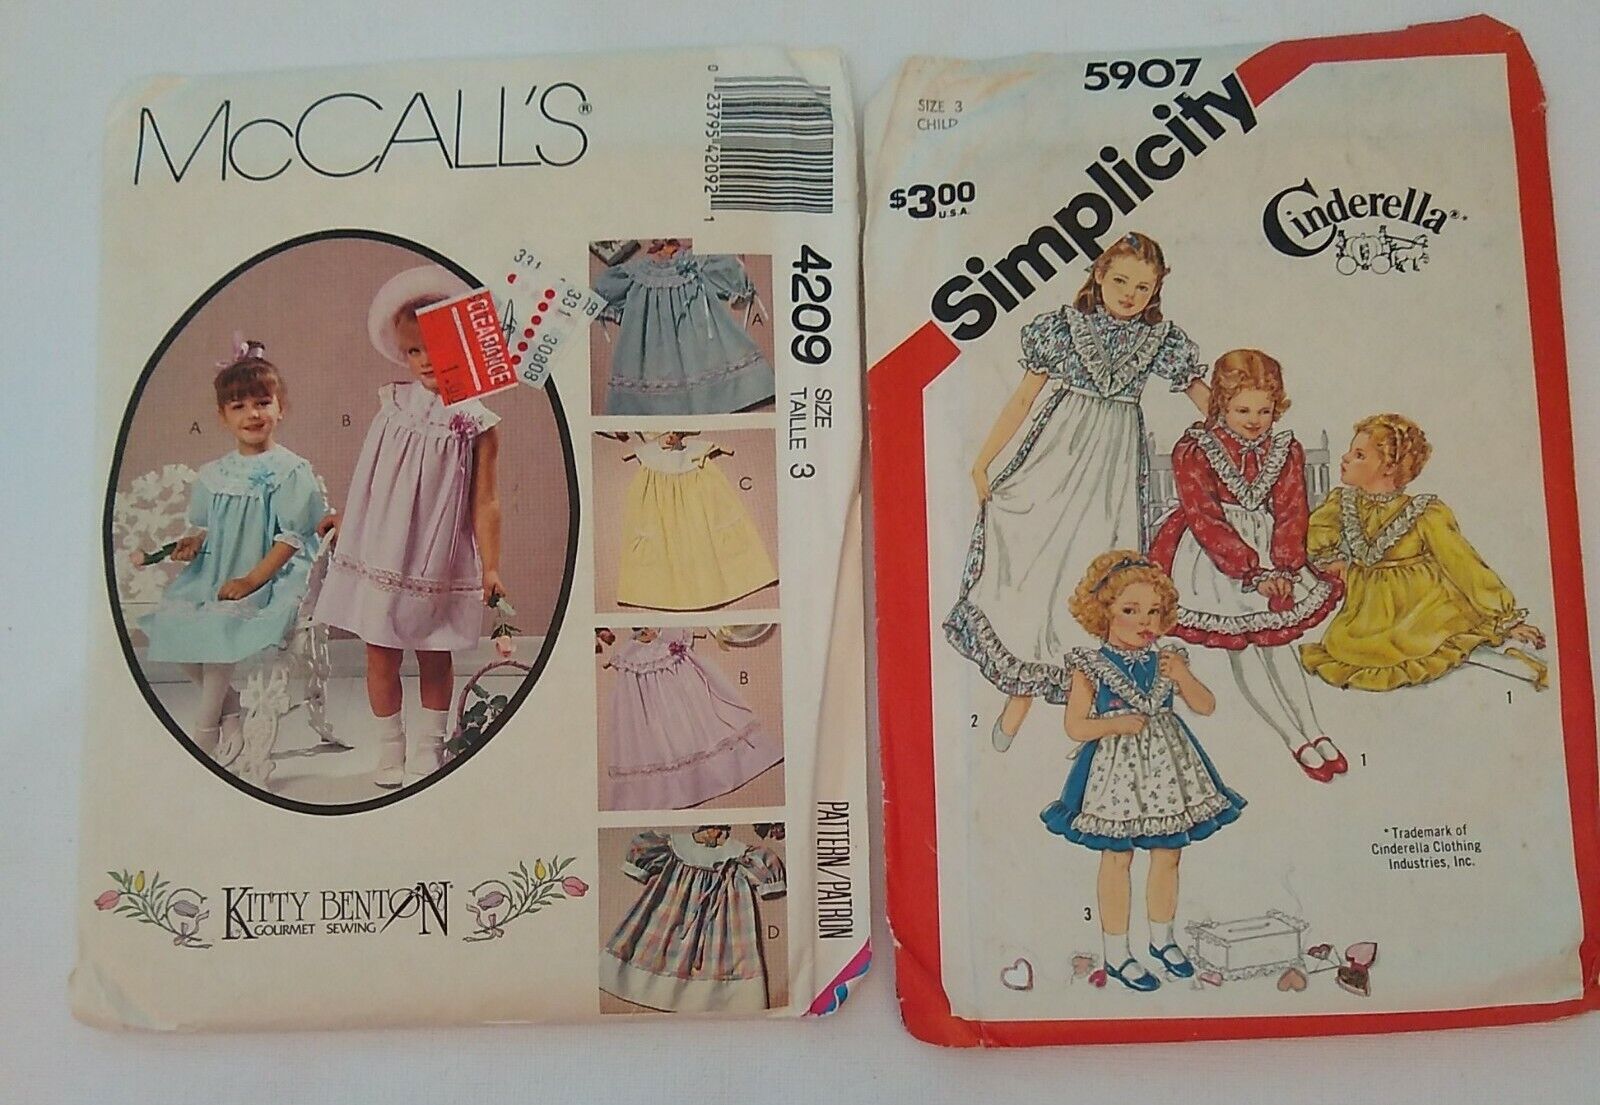 Mccalls 4209 & Simplicity 5907 Cinderella Size 3 Sewing Patterns Dresses Lotof2